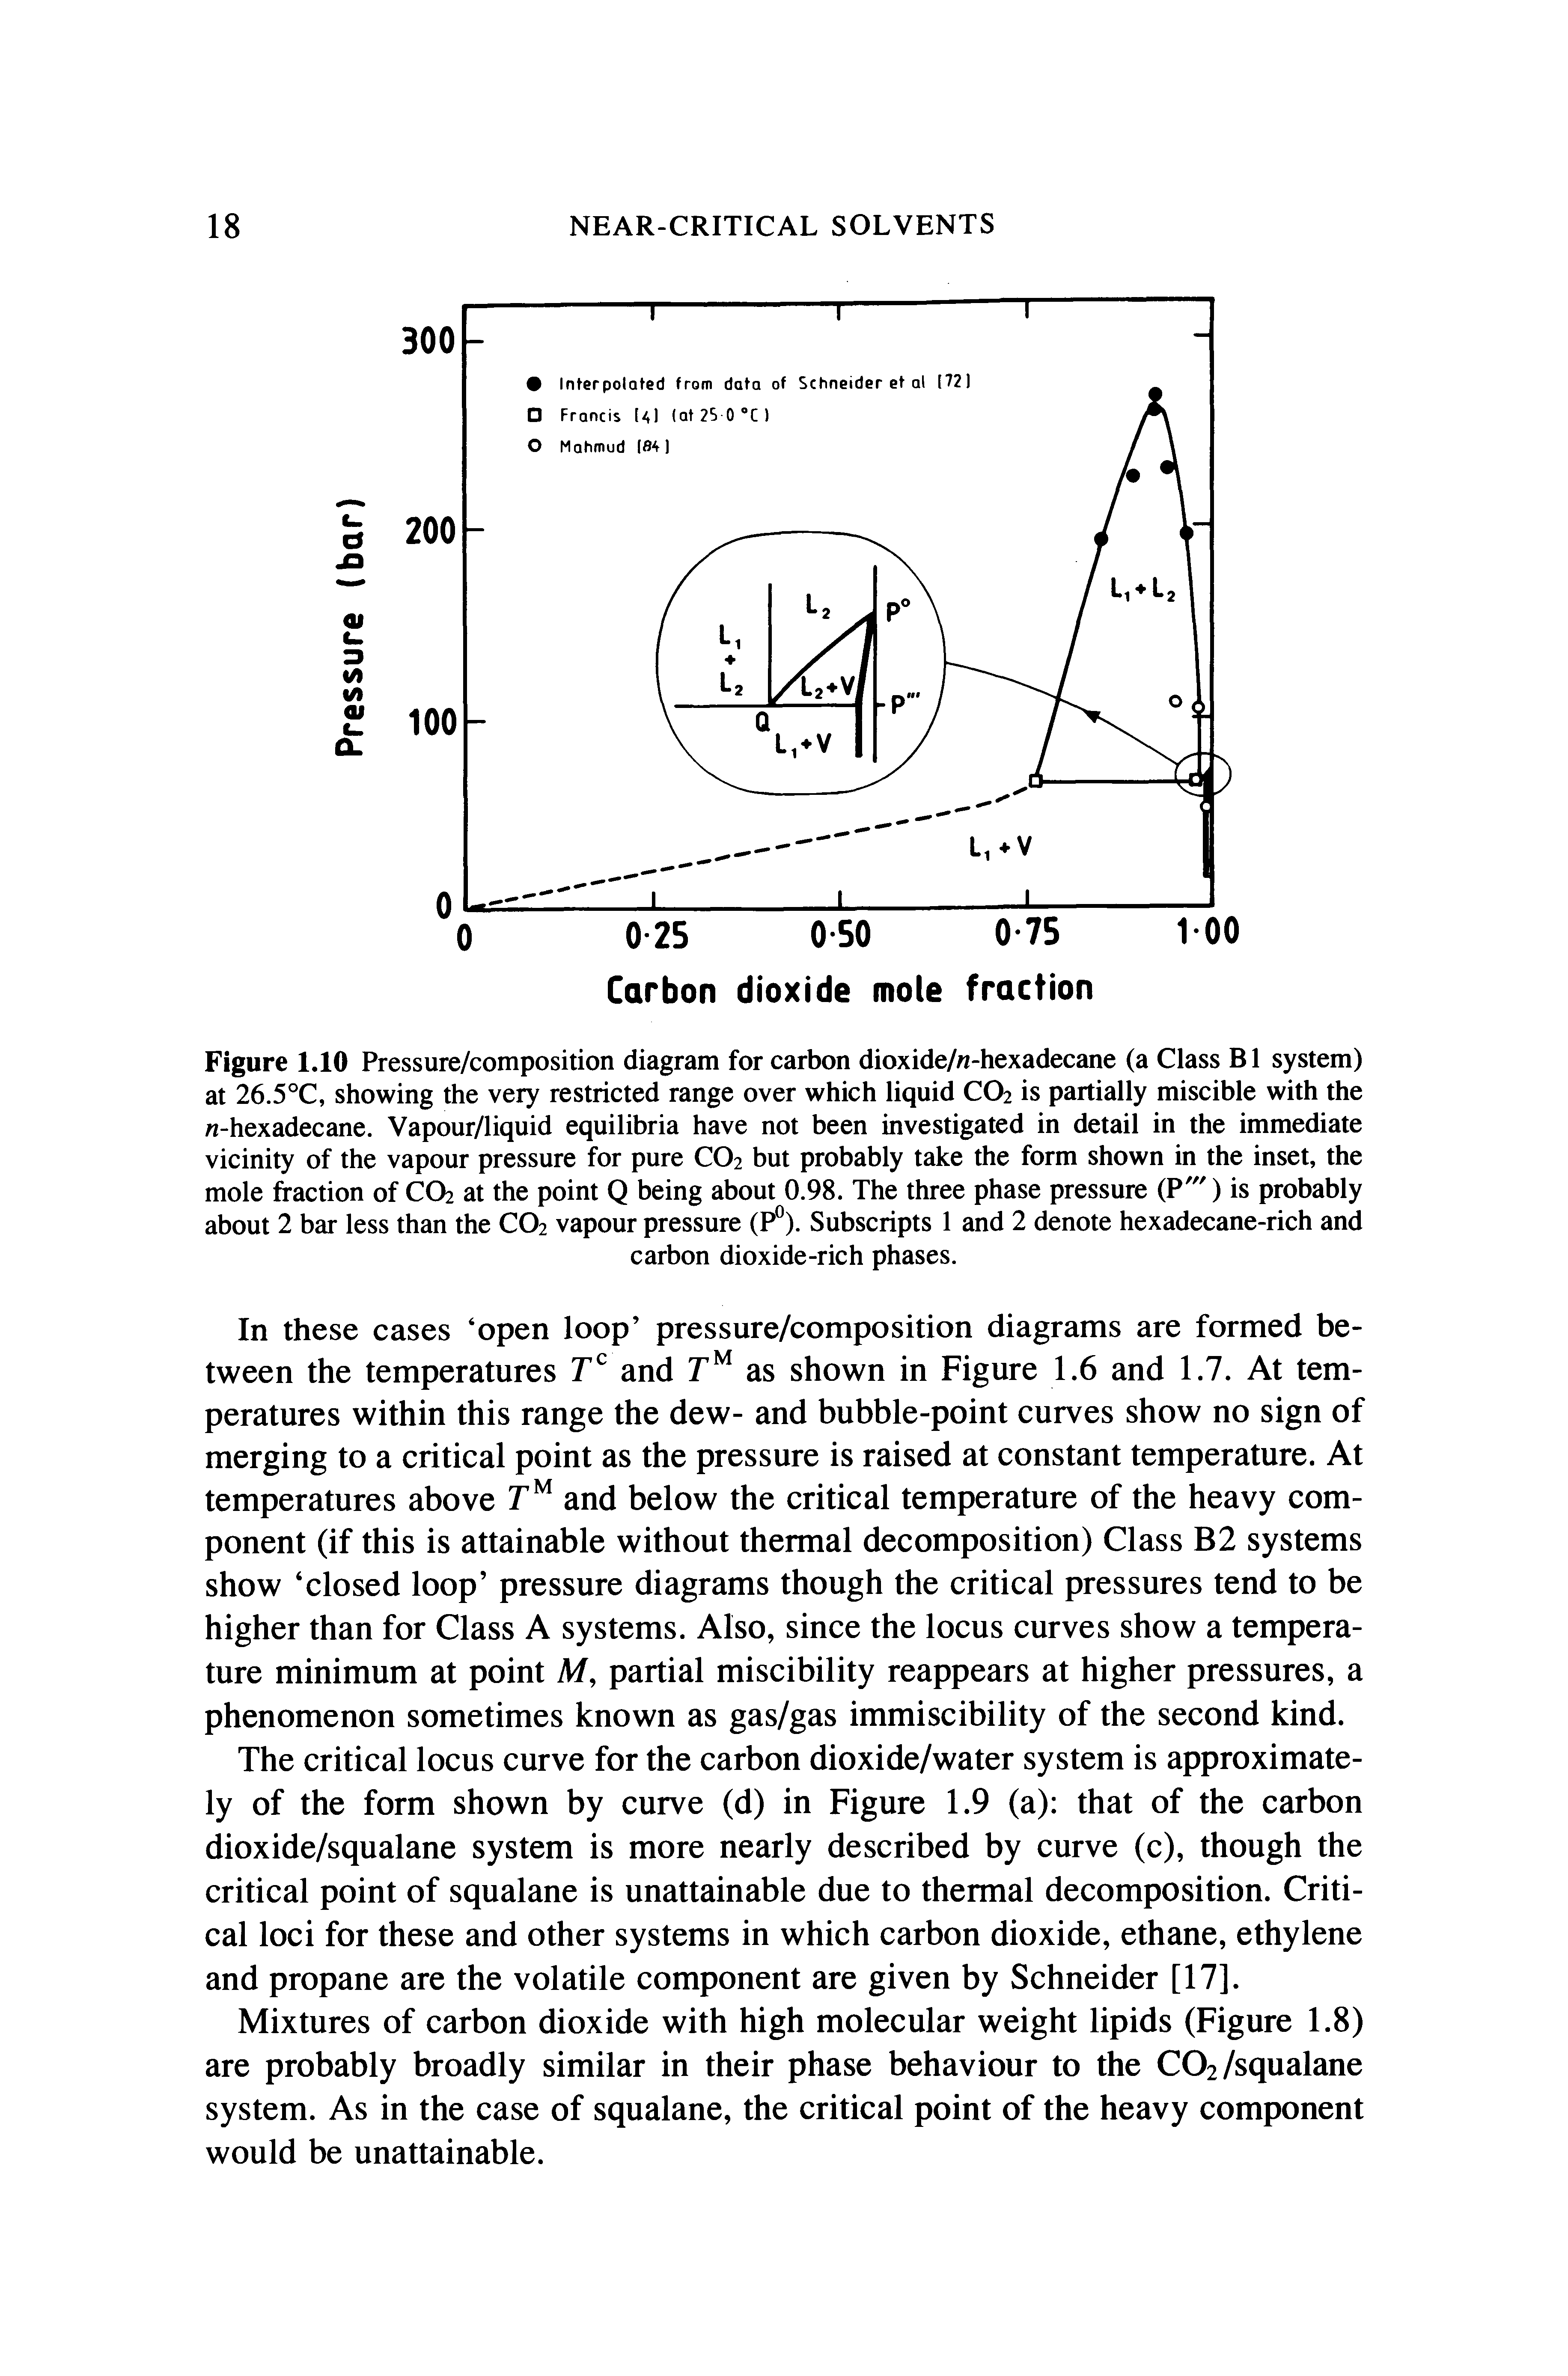 Figure 1.10 Pressure/composition diagram for carbon dioxide//i-hexadecane (a Class B1 system) at 26.5°C, showing the very restricted range over which liquid CO2 is partially miscible with the -hexadecane. Vapour/liquid equilibria have not been investigated in detail in the immediate vicinity of the vapour pressure for pure CO2 but probably take the form shown in the inset, the mole fraction of CO2 at the point Q being about 0.98. The three phase pressure (P ") is probably about 2 bar less than the CO2 vapour pressure (P°). Subscripts 1 and 2 denote hexadecane-rich and...